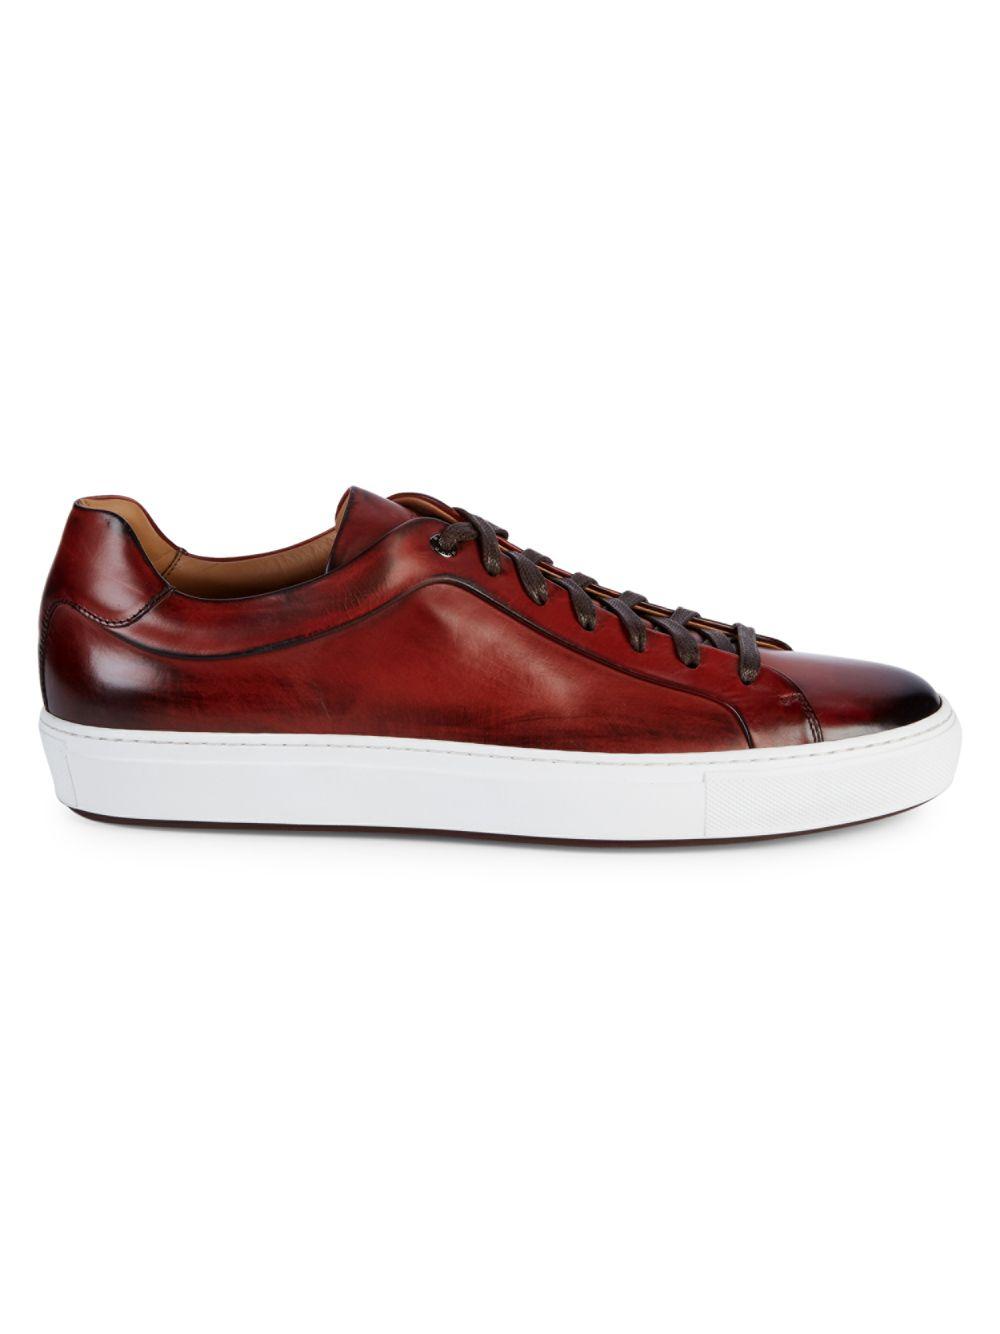 BOSS by BOSS Mirage Leather Tennis Shoes in Red for Men |